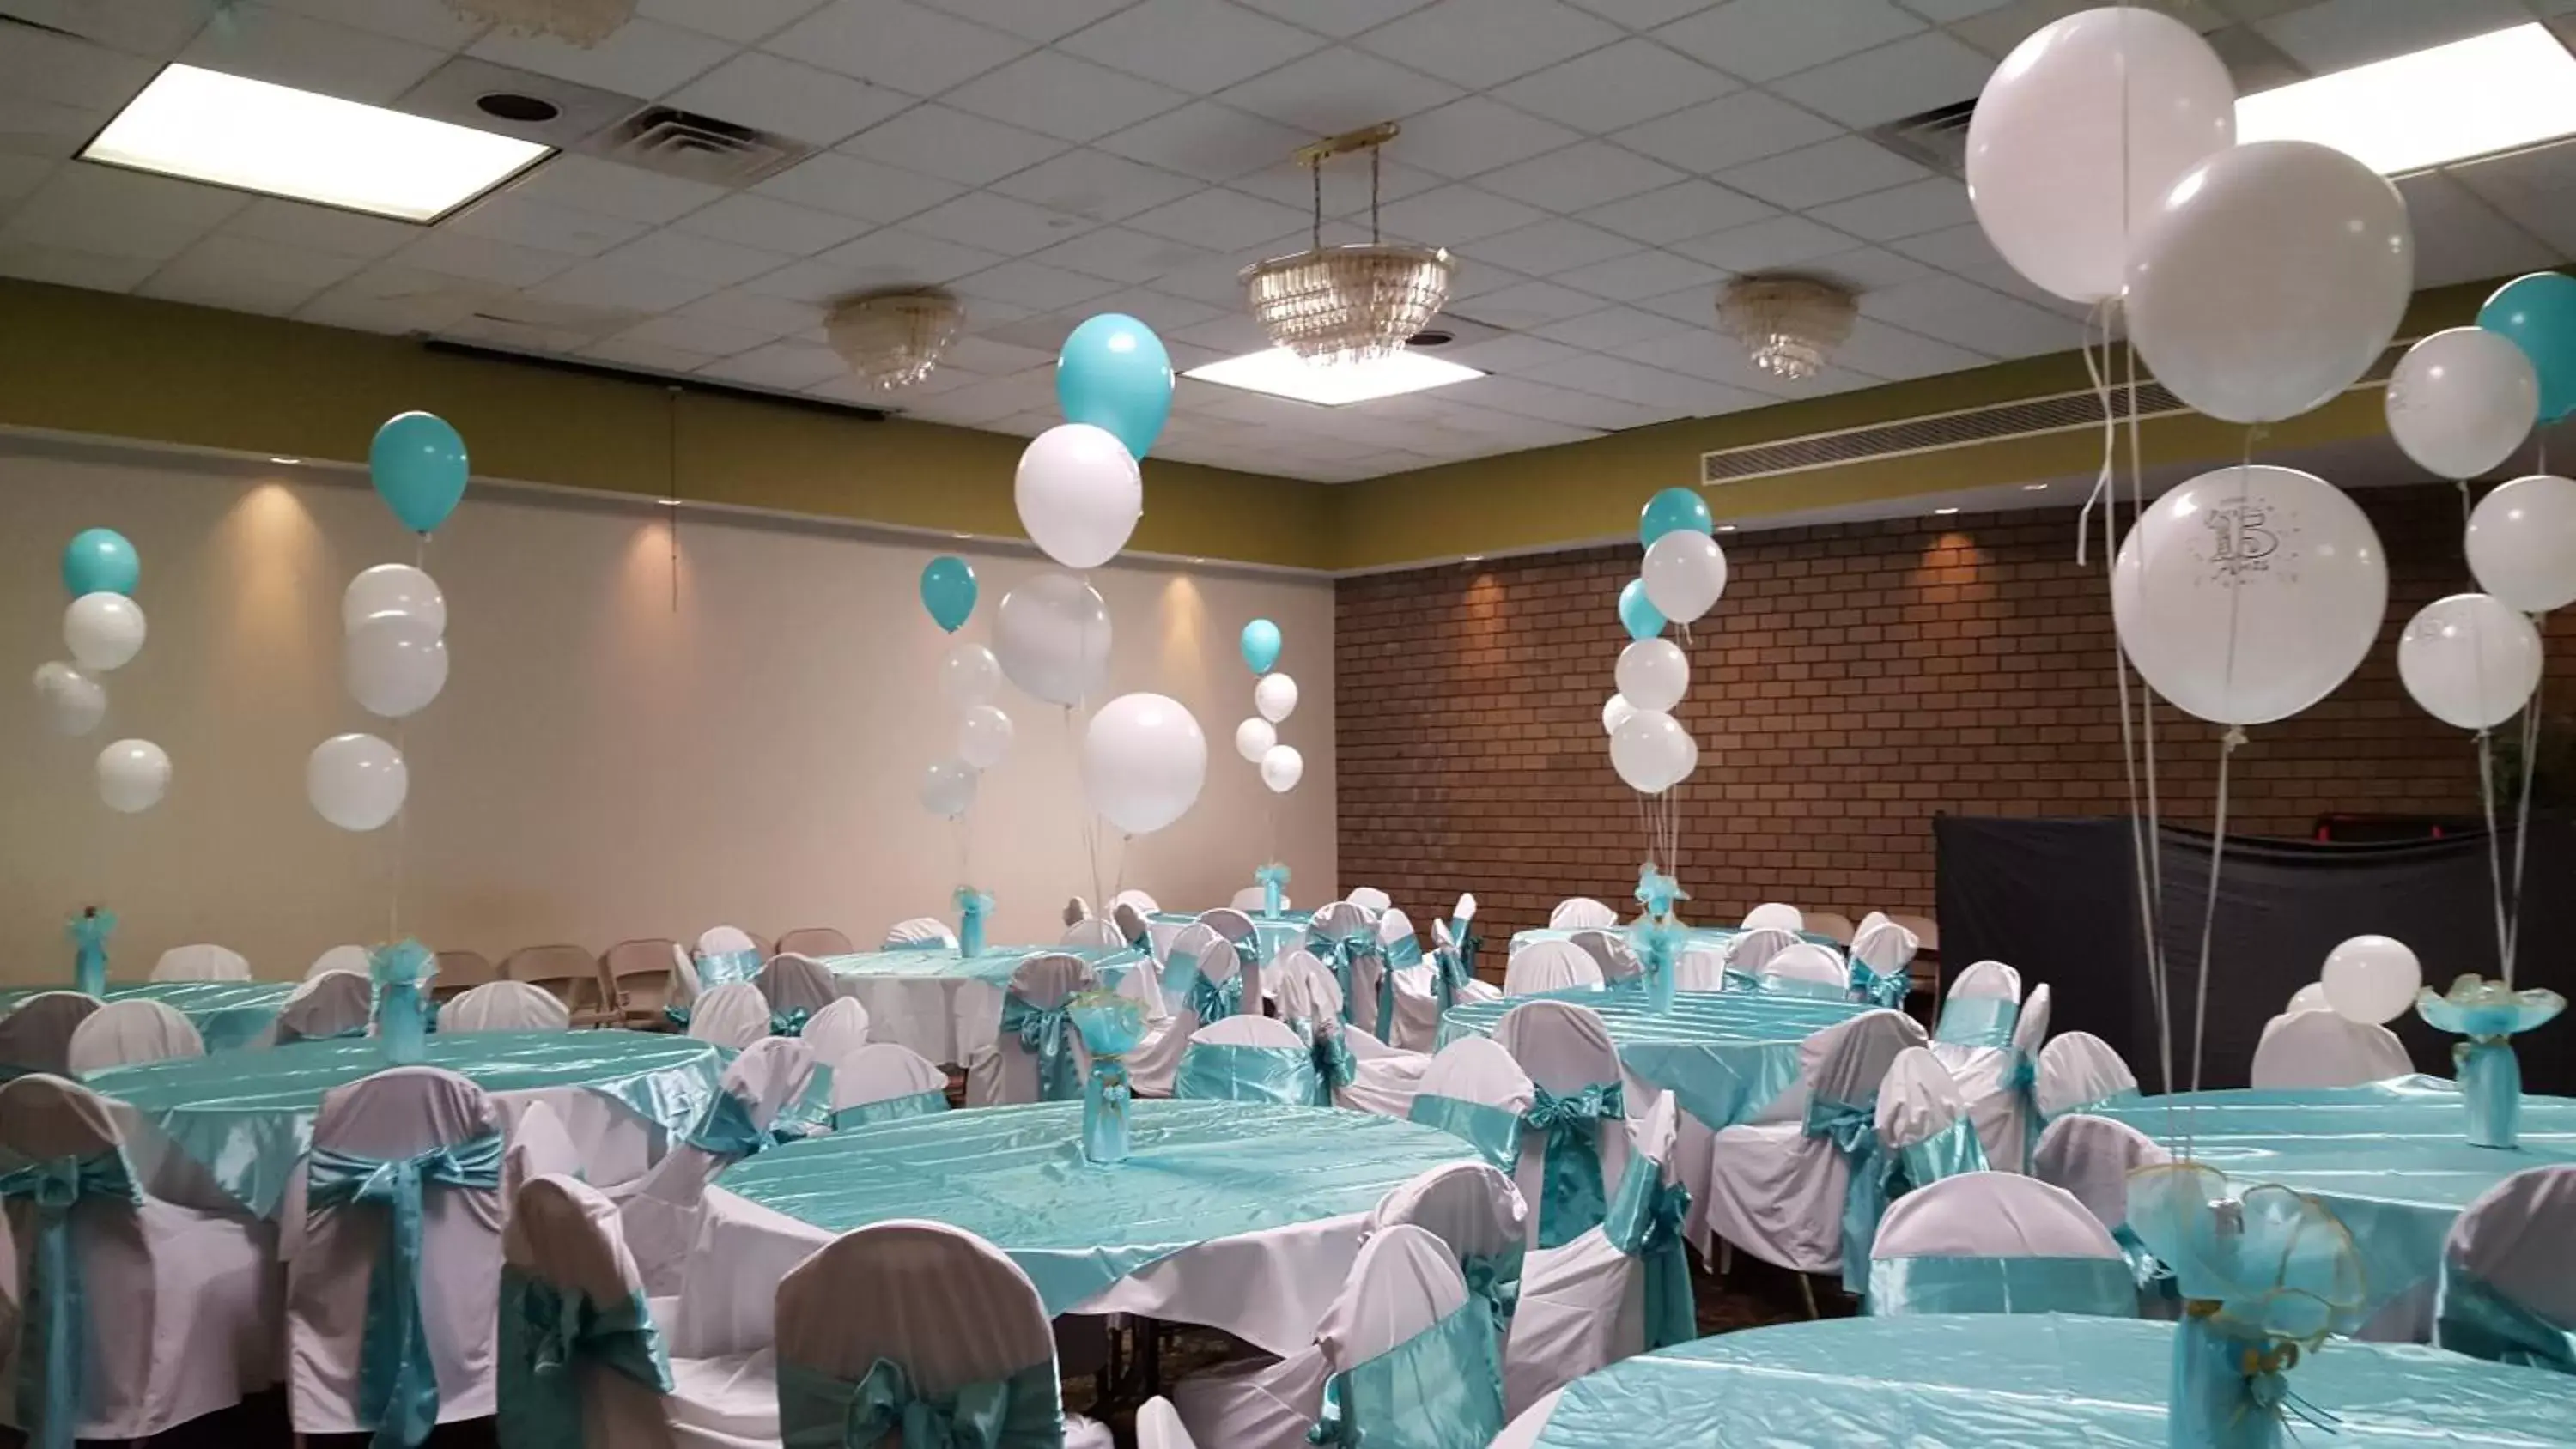 Banquet/Function facilities, Banquet Facilities in Days Inn & Conf Center by Wyndham Southern Pines Pinehurst